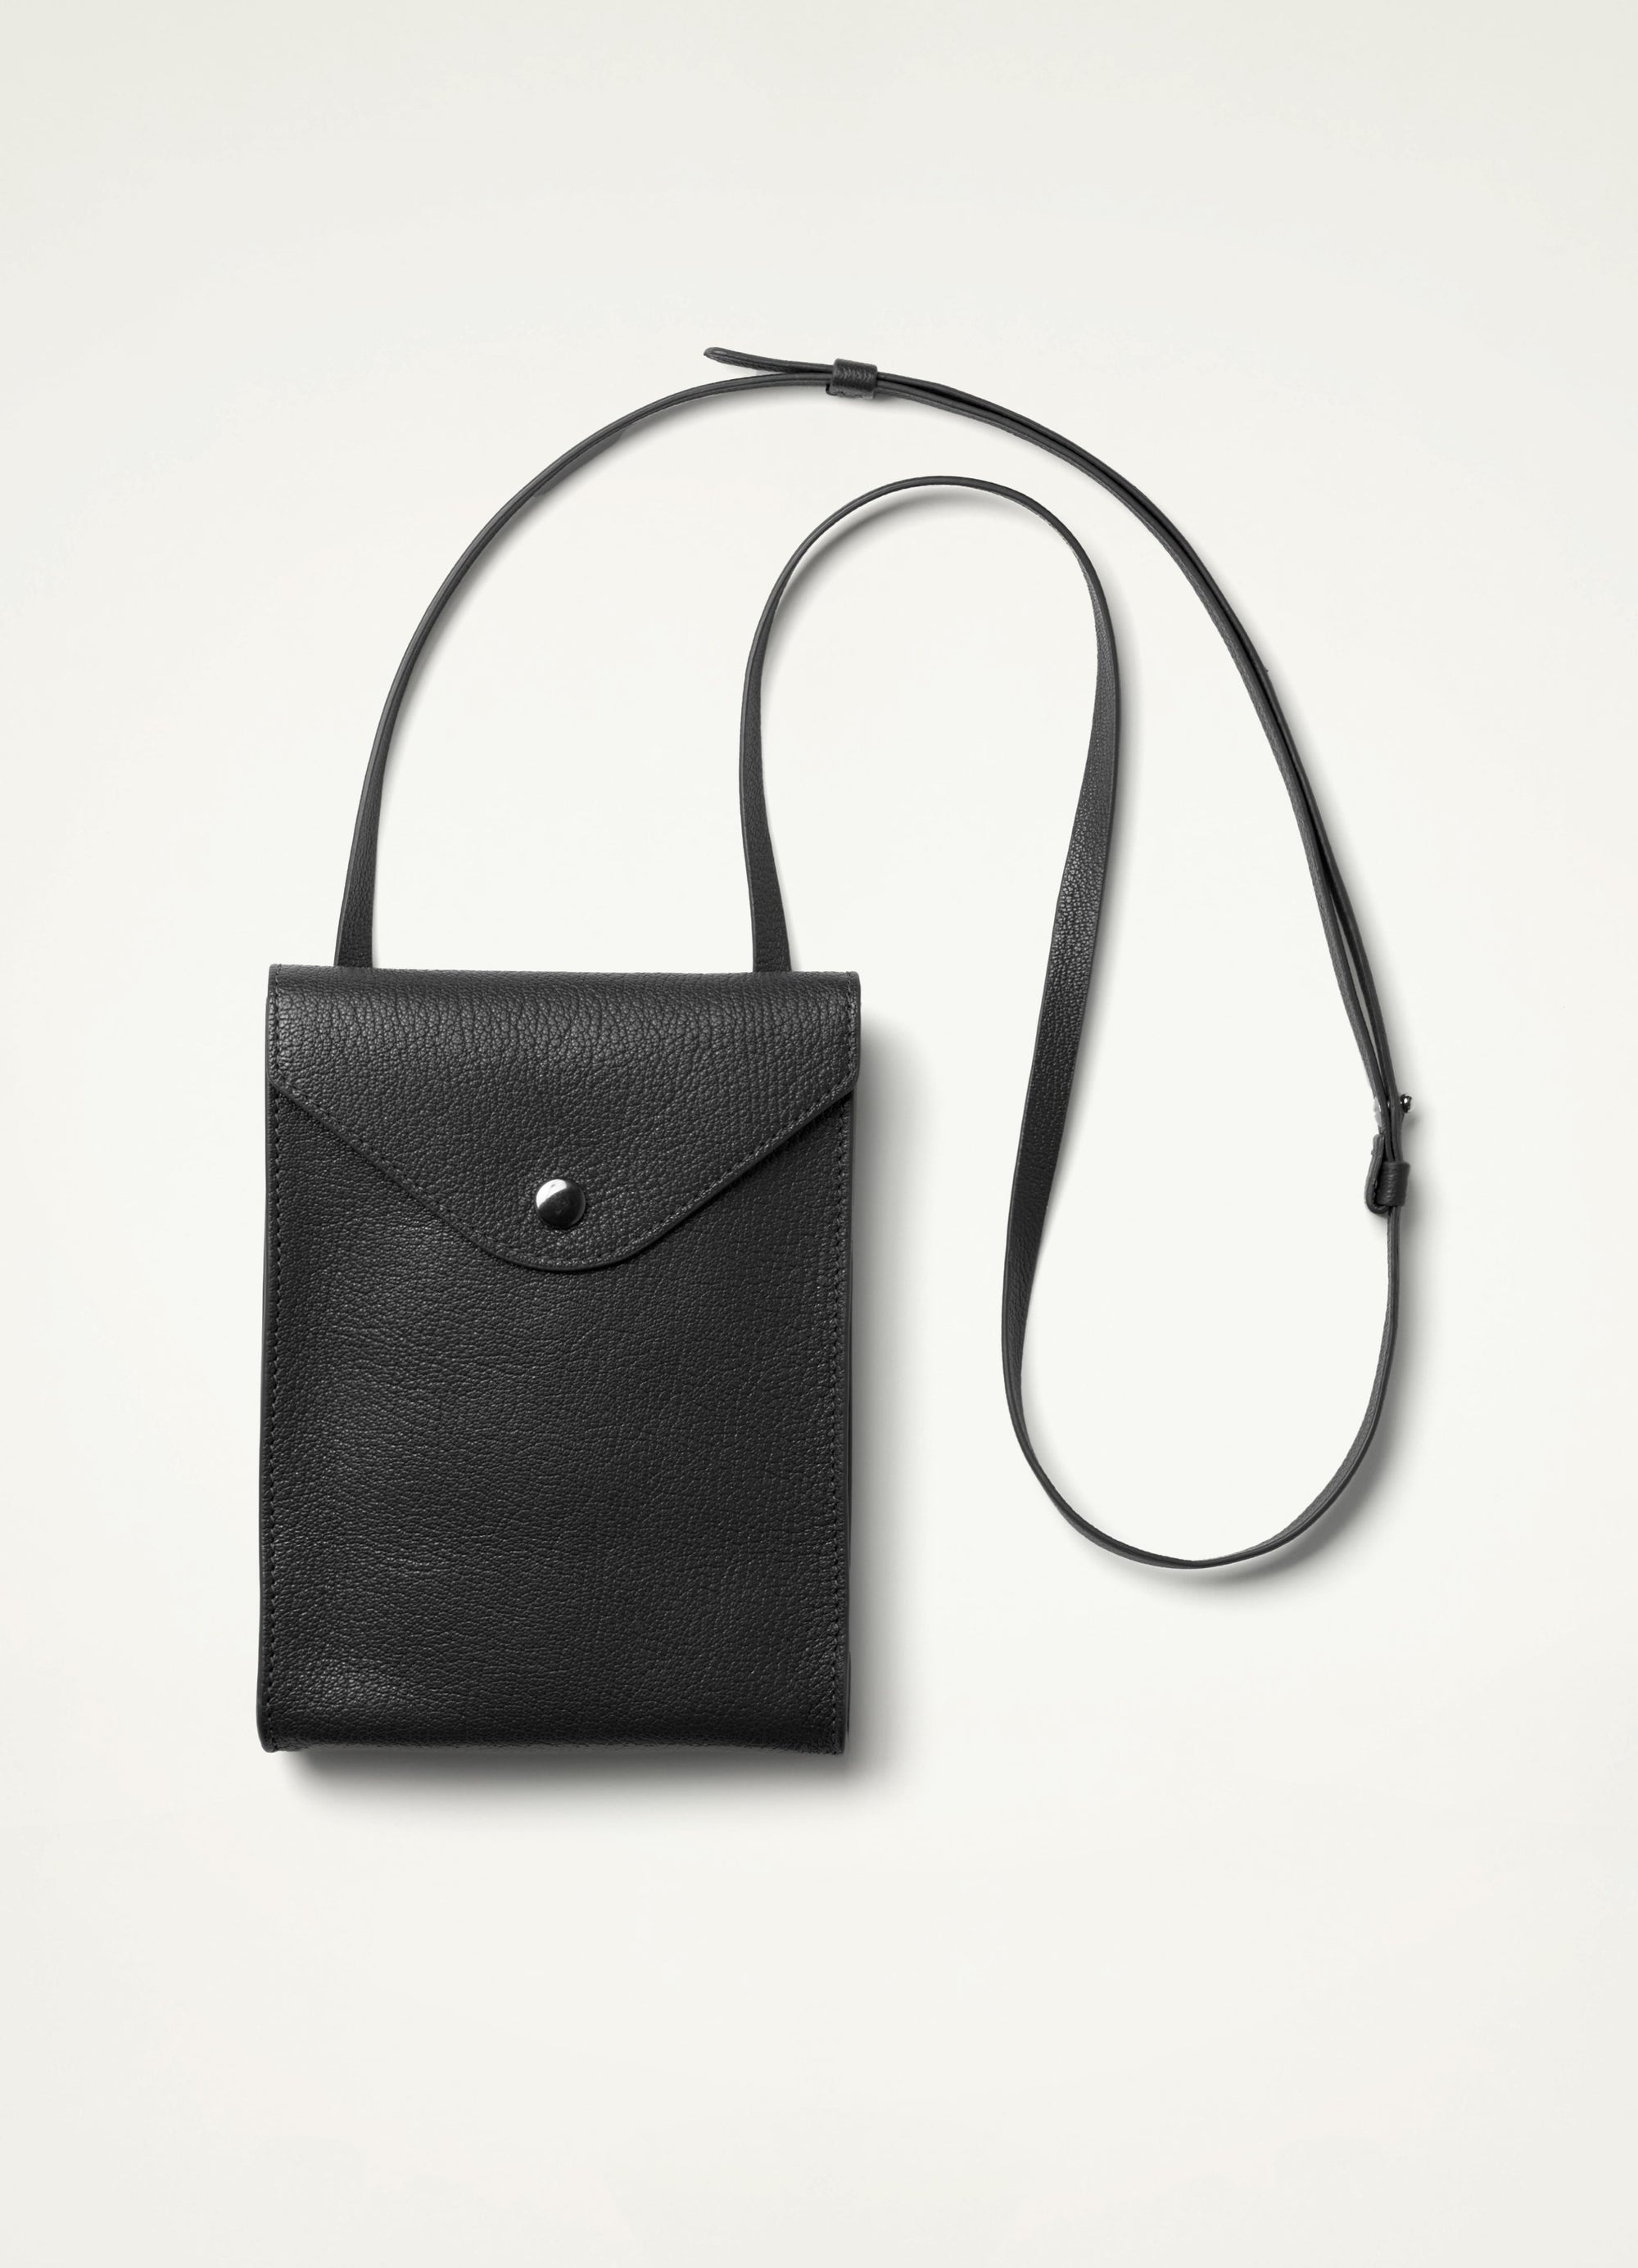 ENVELOPPE WITH STRAP
GOAT LEATHER - 1